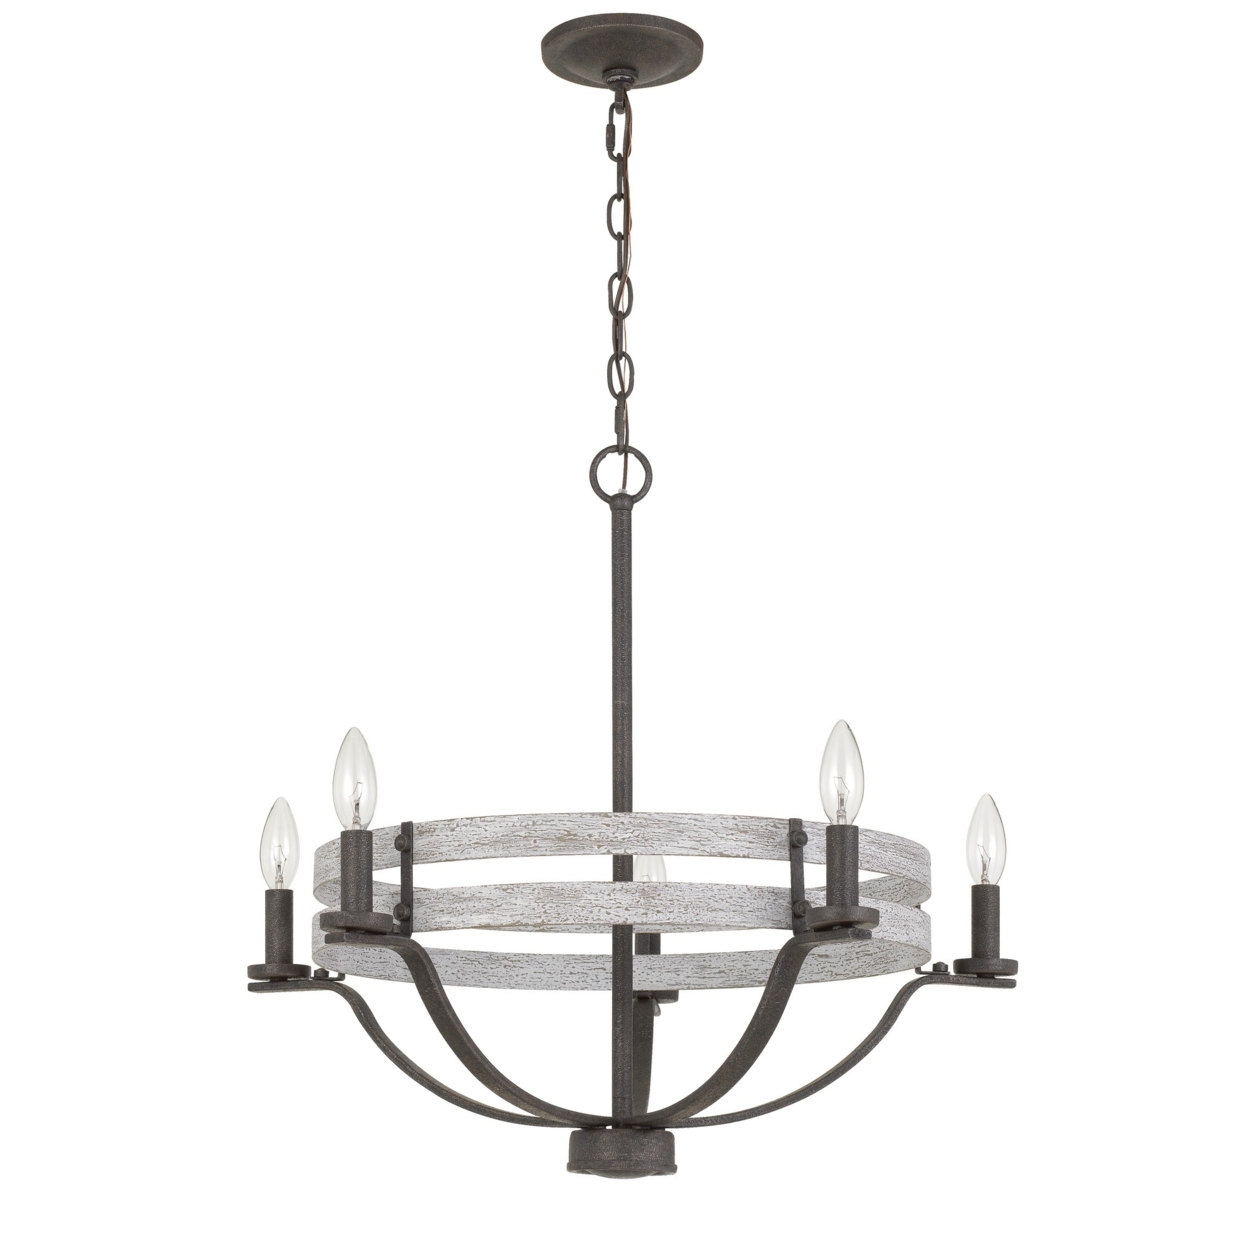 Metal Chandelier With Wooden Round Frame Support, Black And Gray- Saltoro Sherpi